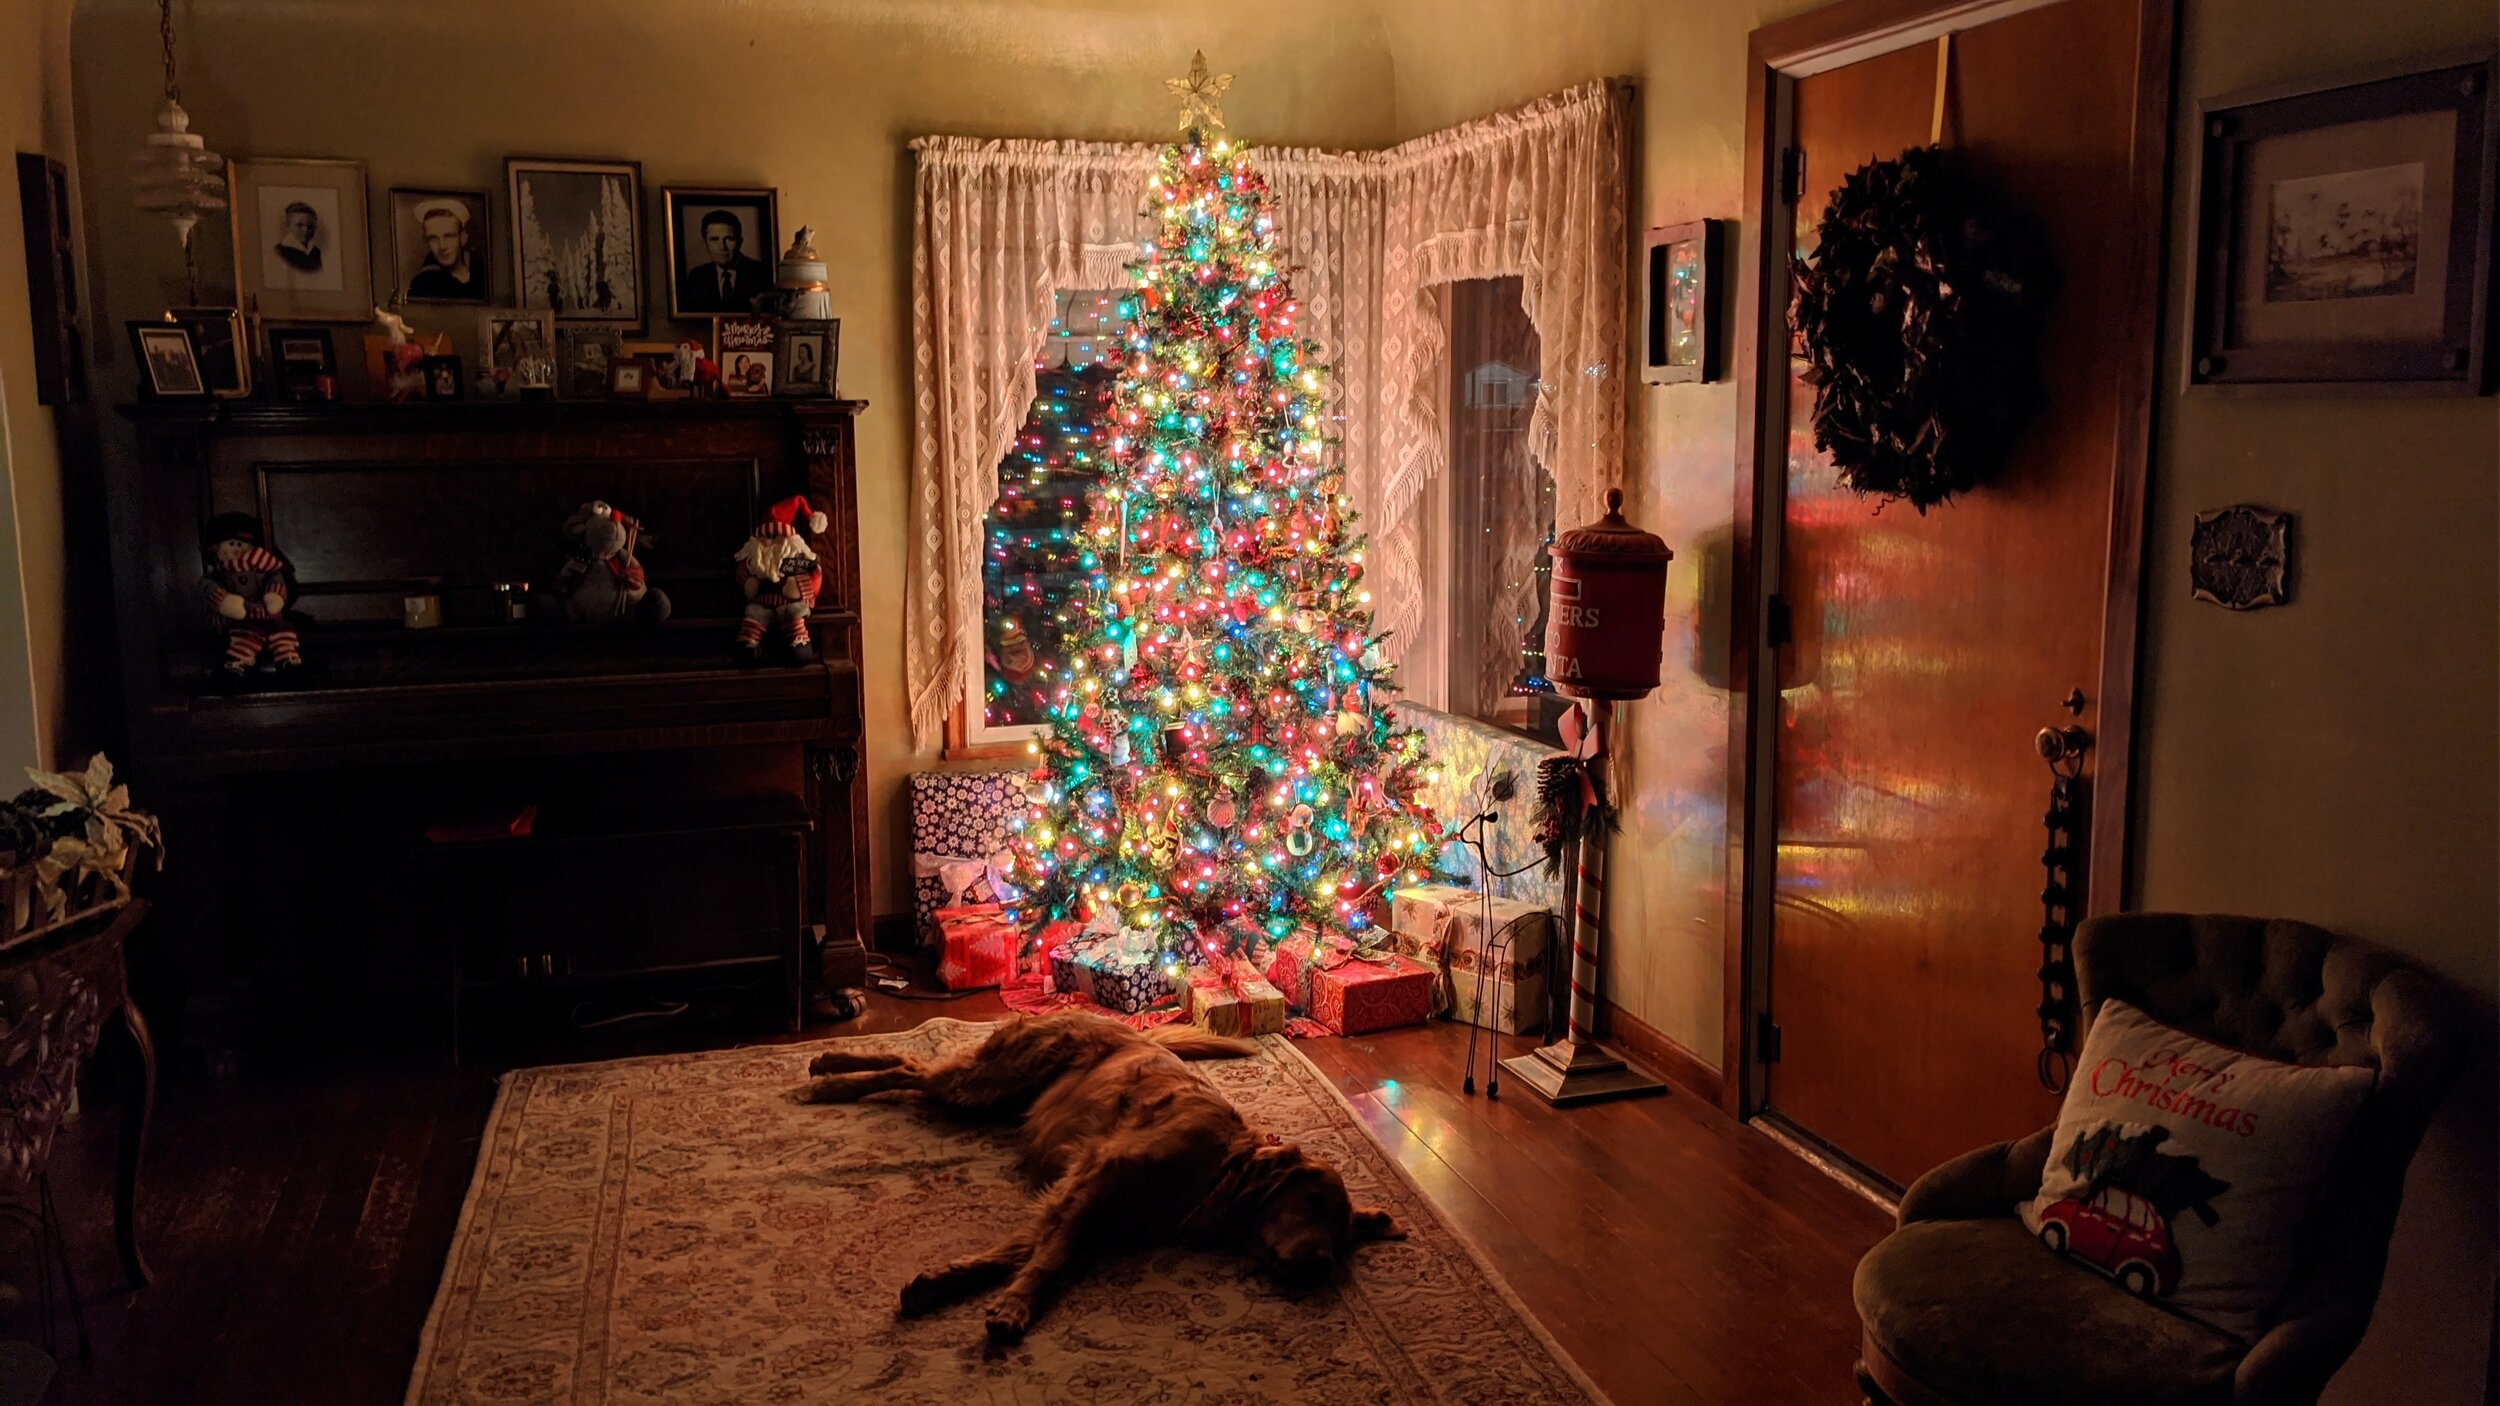 A golden retriever lays under a brightly lit Christmas tree in a dark room